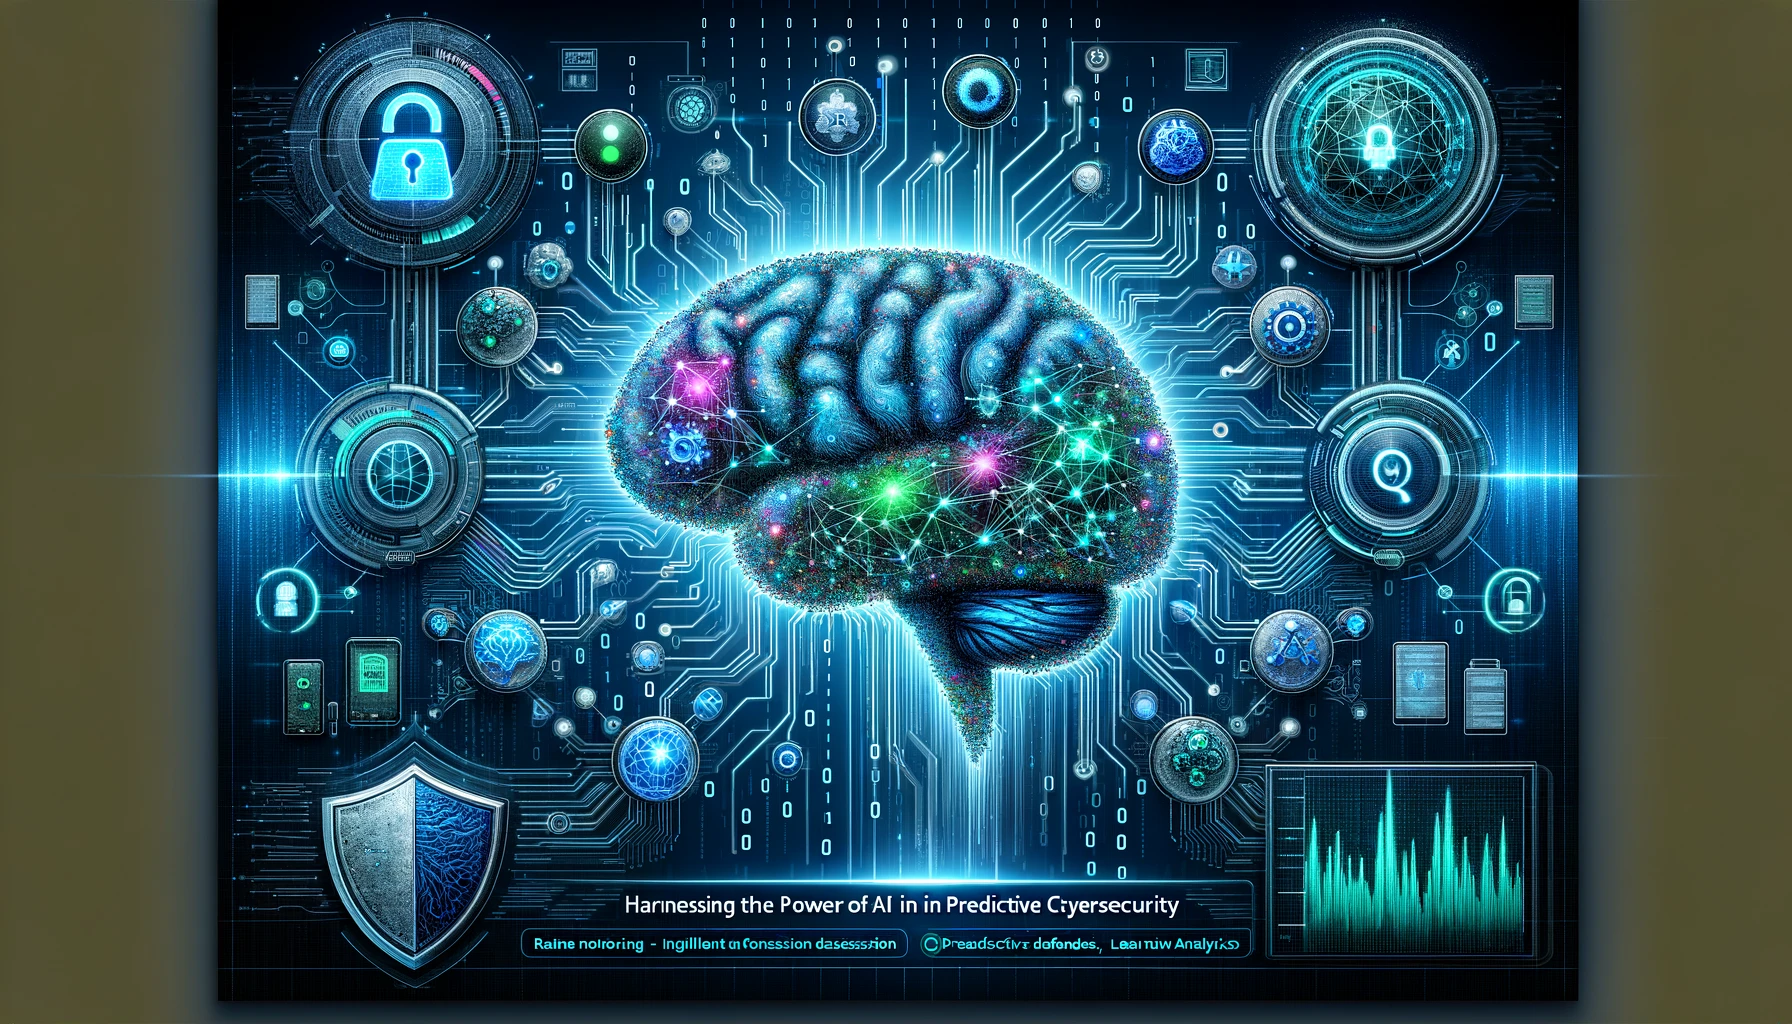 Harnessing the Power of AI and ML in Predictive Cybersecurity